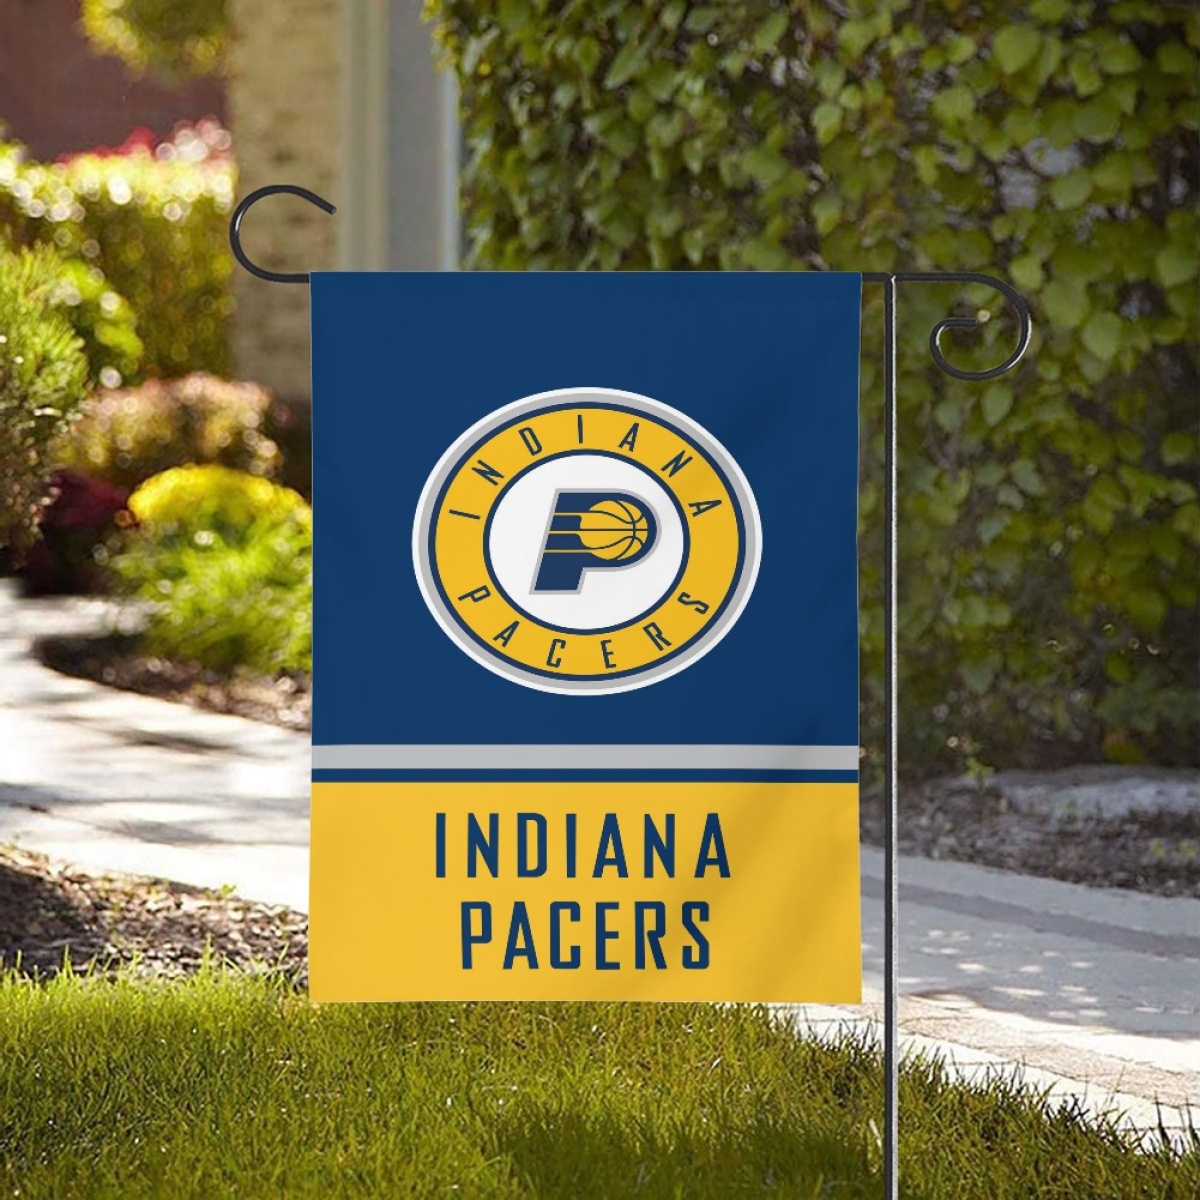 Indiana Pacers Double-Sided Garden Flag 001 (Pls check description for details)